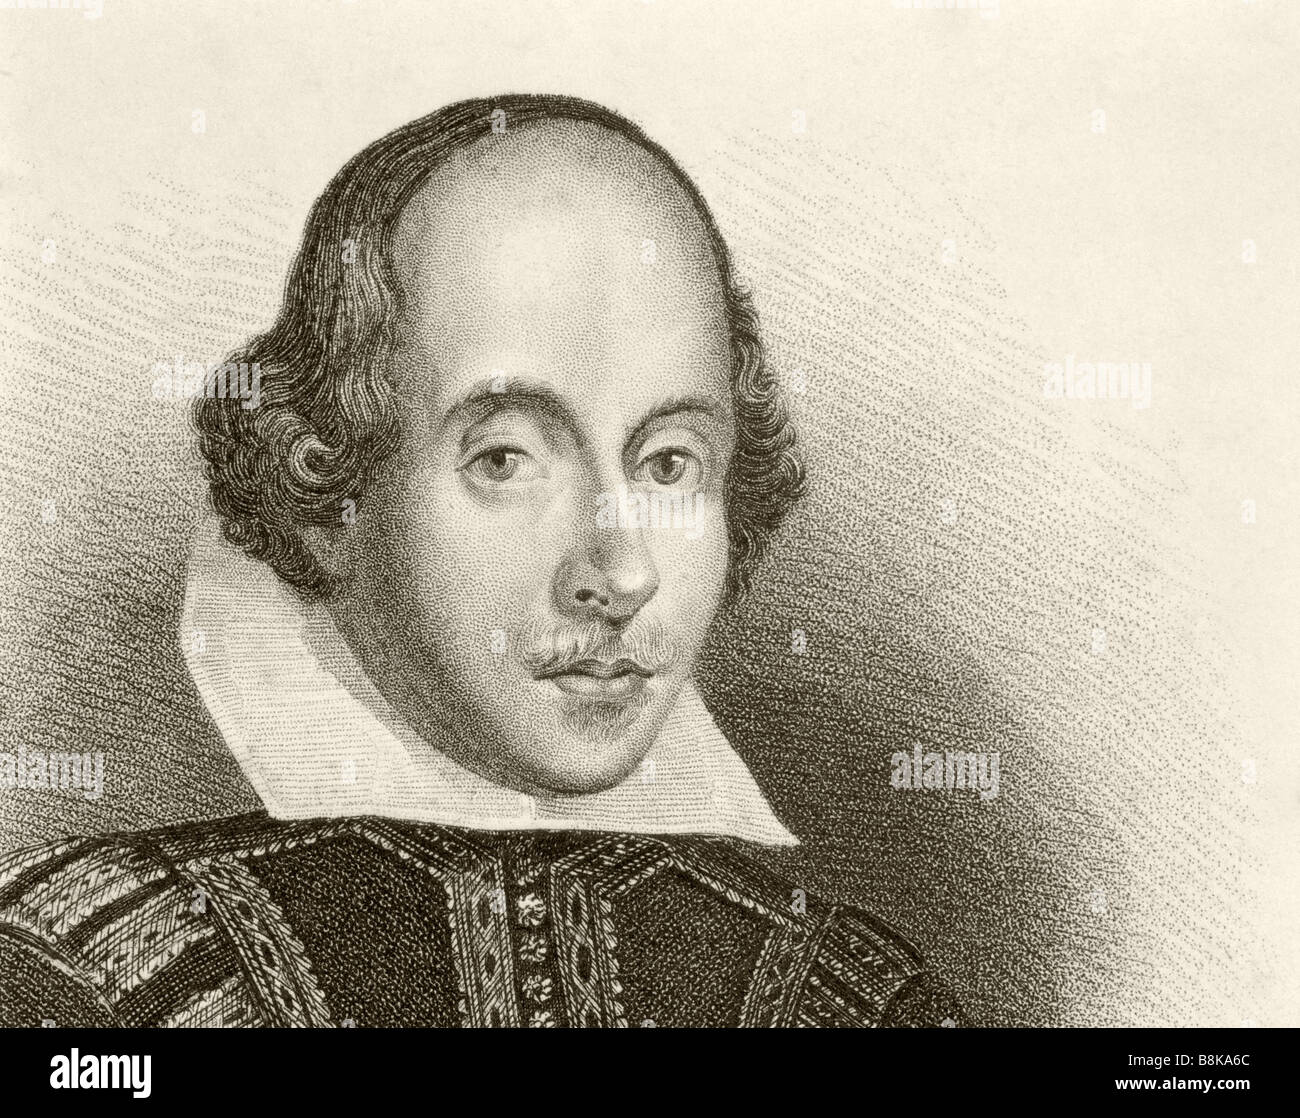 information about william shakespeare as a dramatist